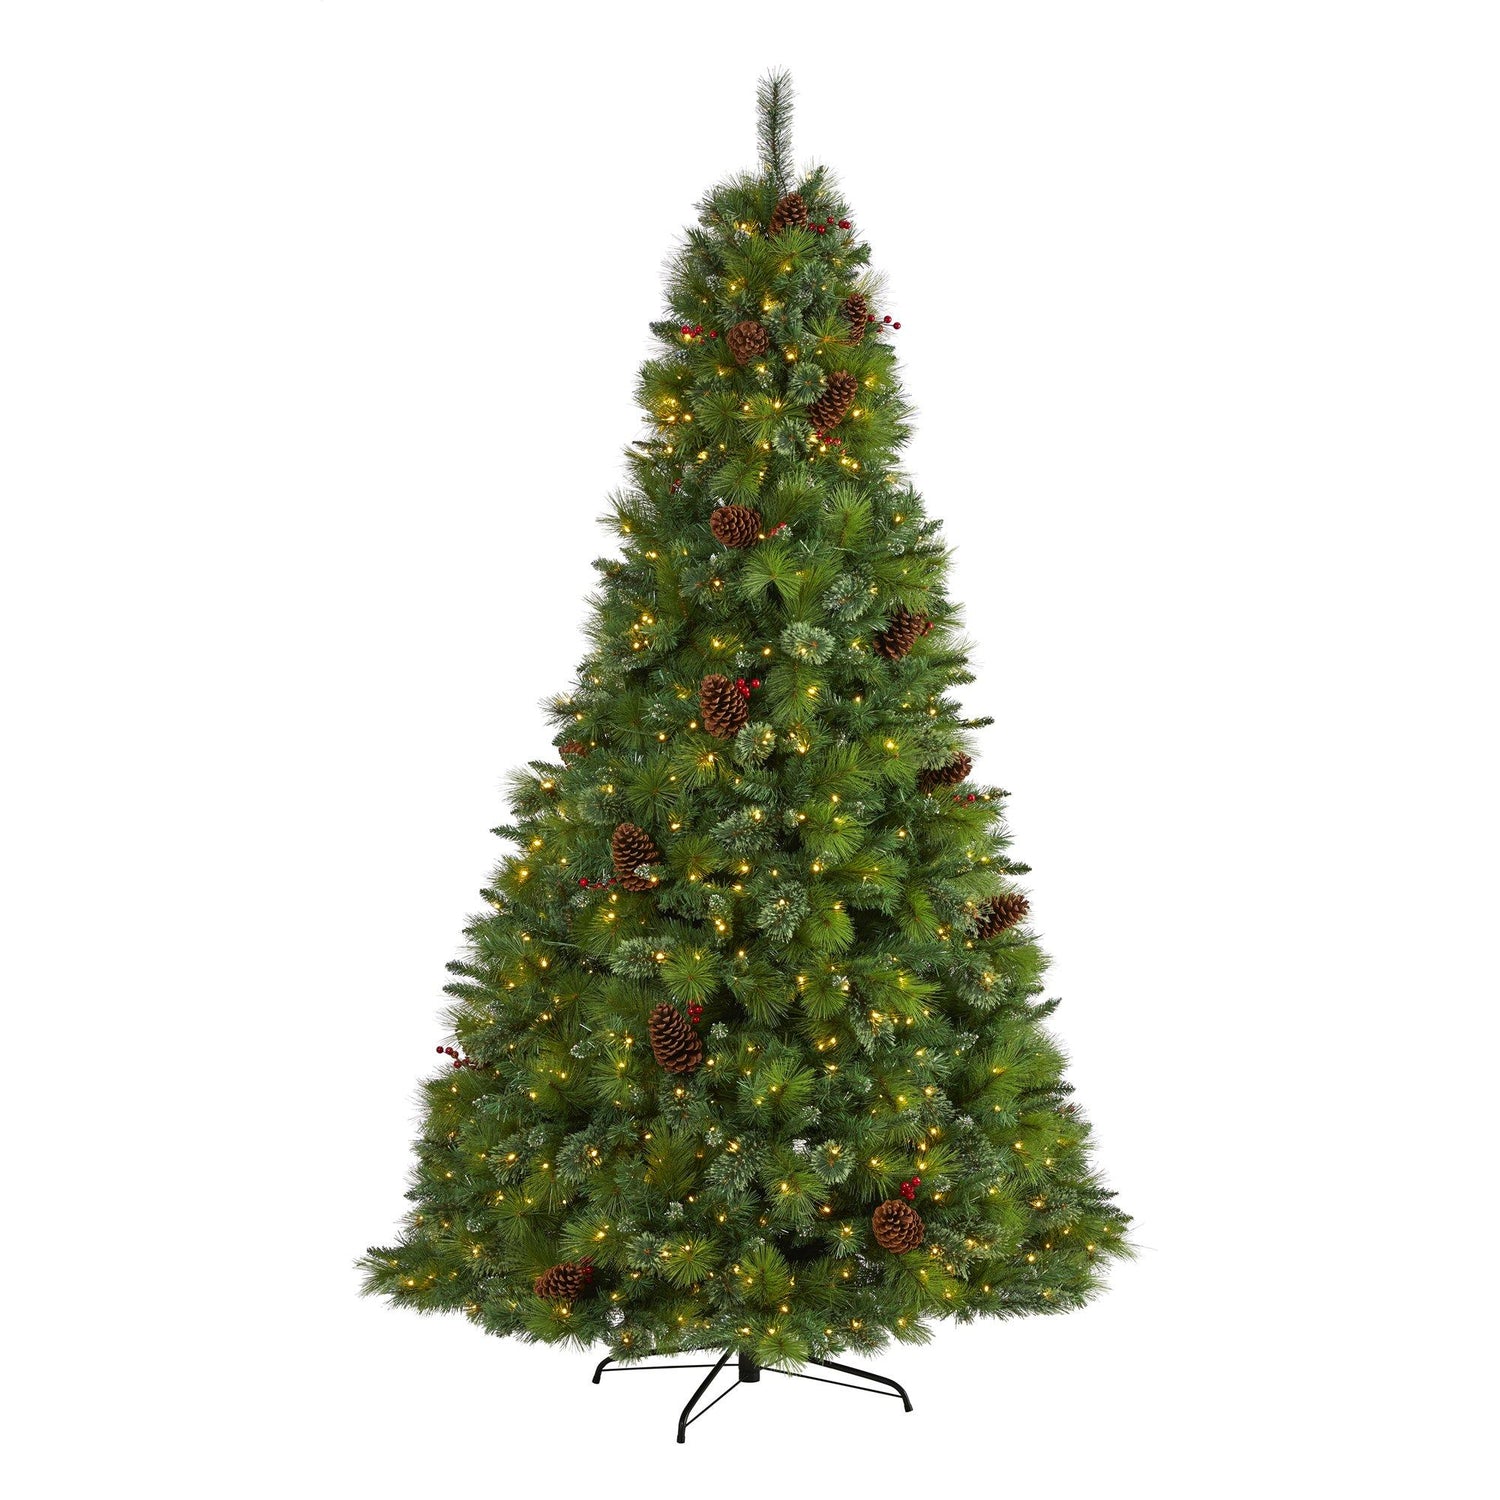 8’ Montana Mixed Pine Artificial Christmas Tree with Pine Cones, Berries and 700 Clear LED Lights